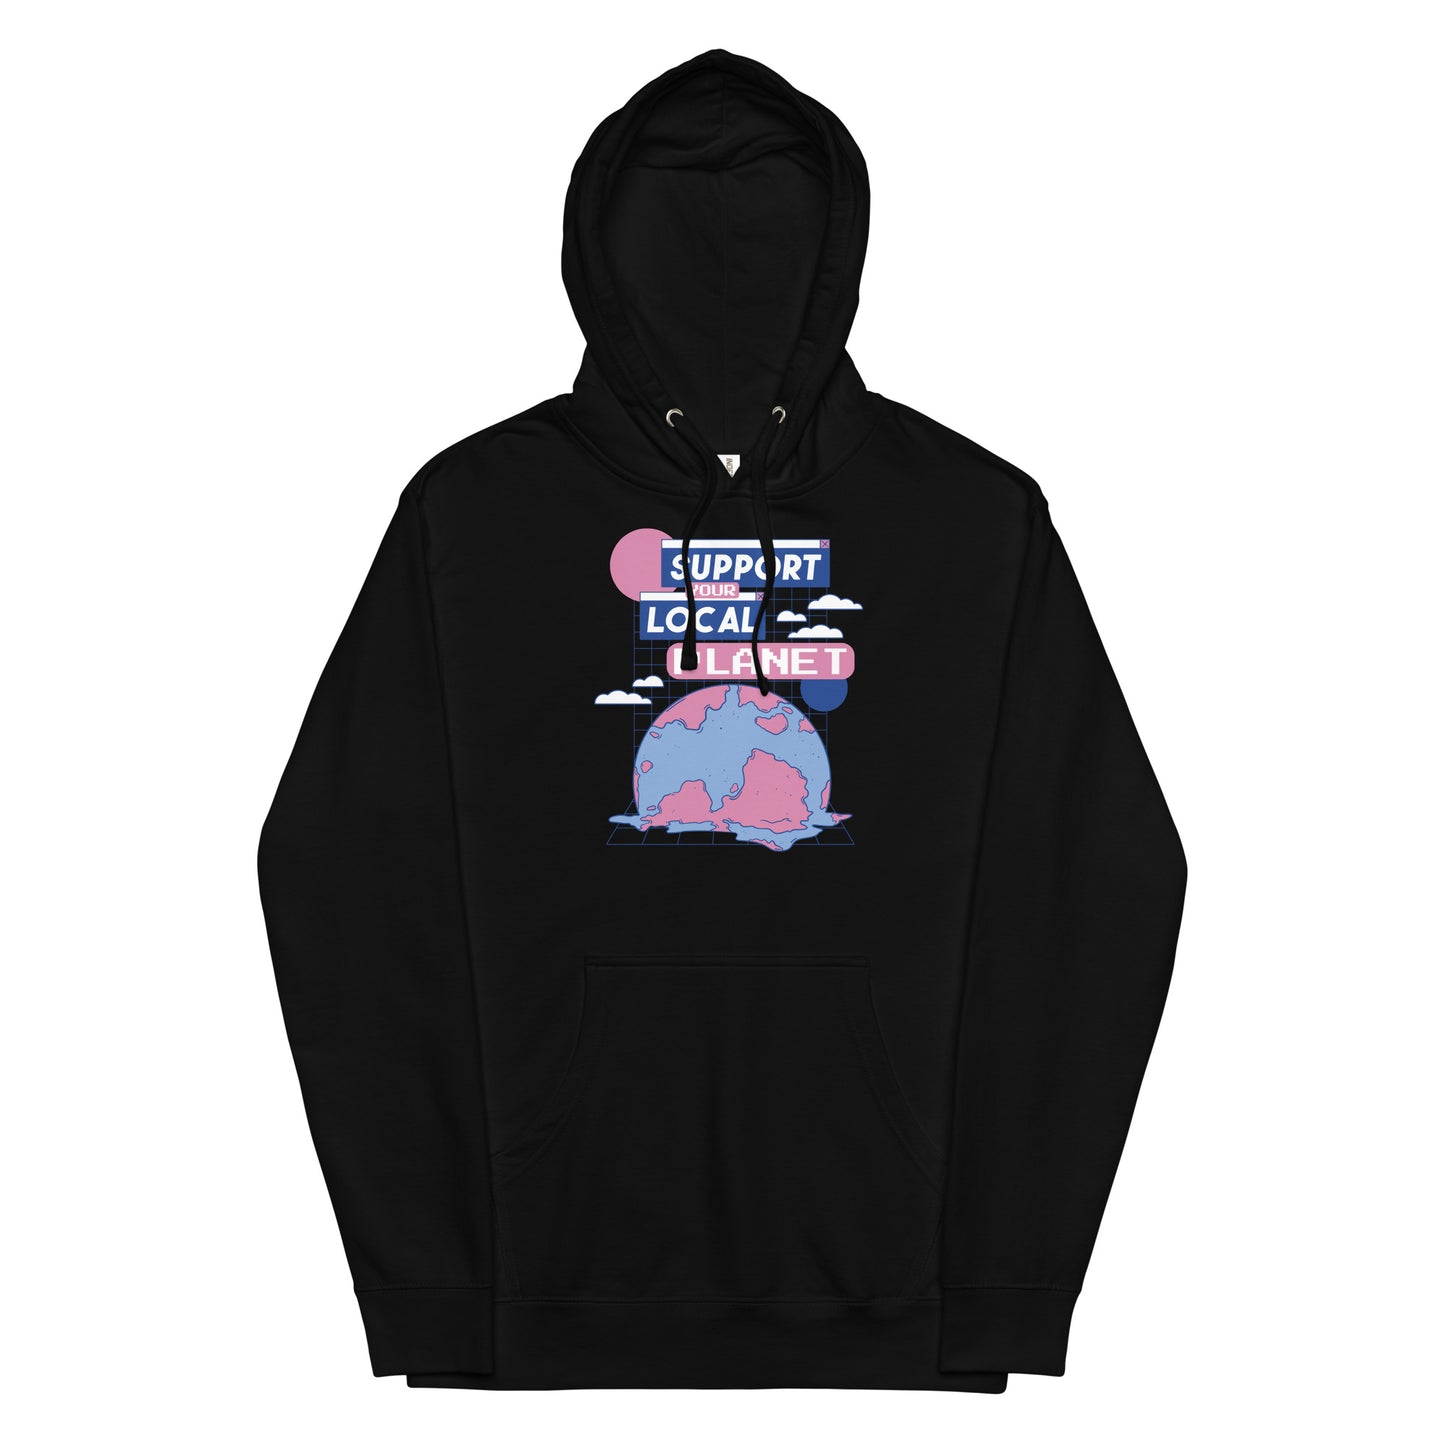 Support Your Local Planet Unisex hoodie